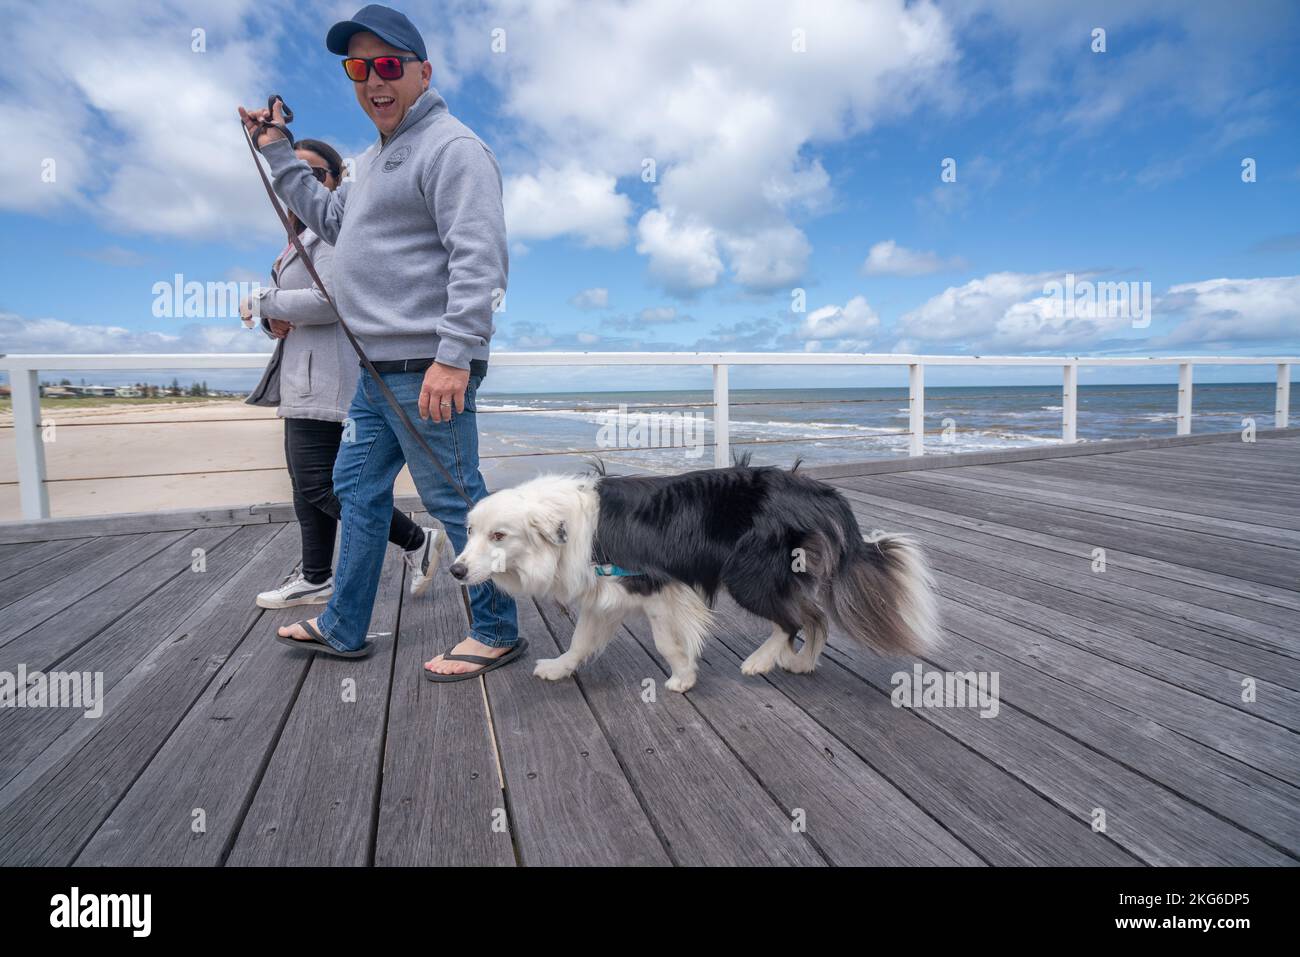 Adelaide, Australia. 22 November 2022. Walkers with a dog on  the jetty pier in Adelaide, South Australia  on a mild sunny day following several days of unsettled weather as temperatures are forecast to rise to mid 20celsius. Credit: amer ghazzal/Alamy Live News Stock Photo